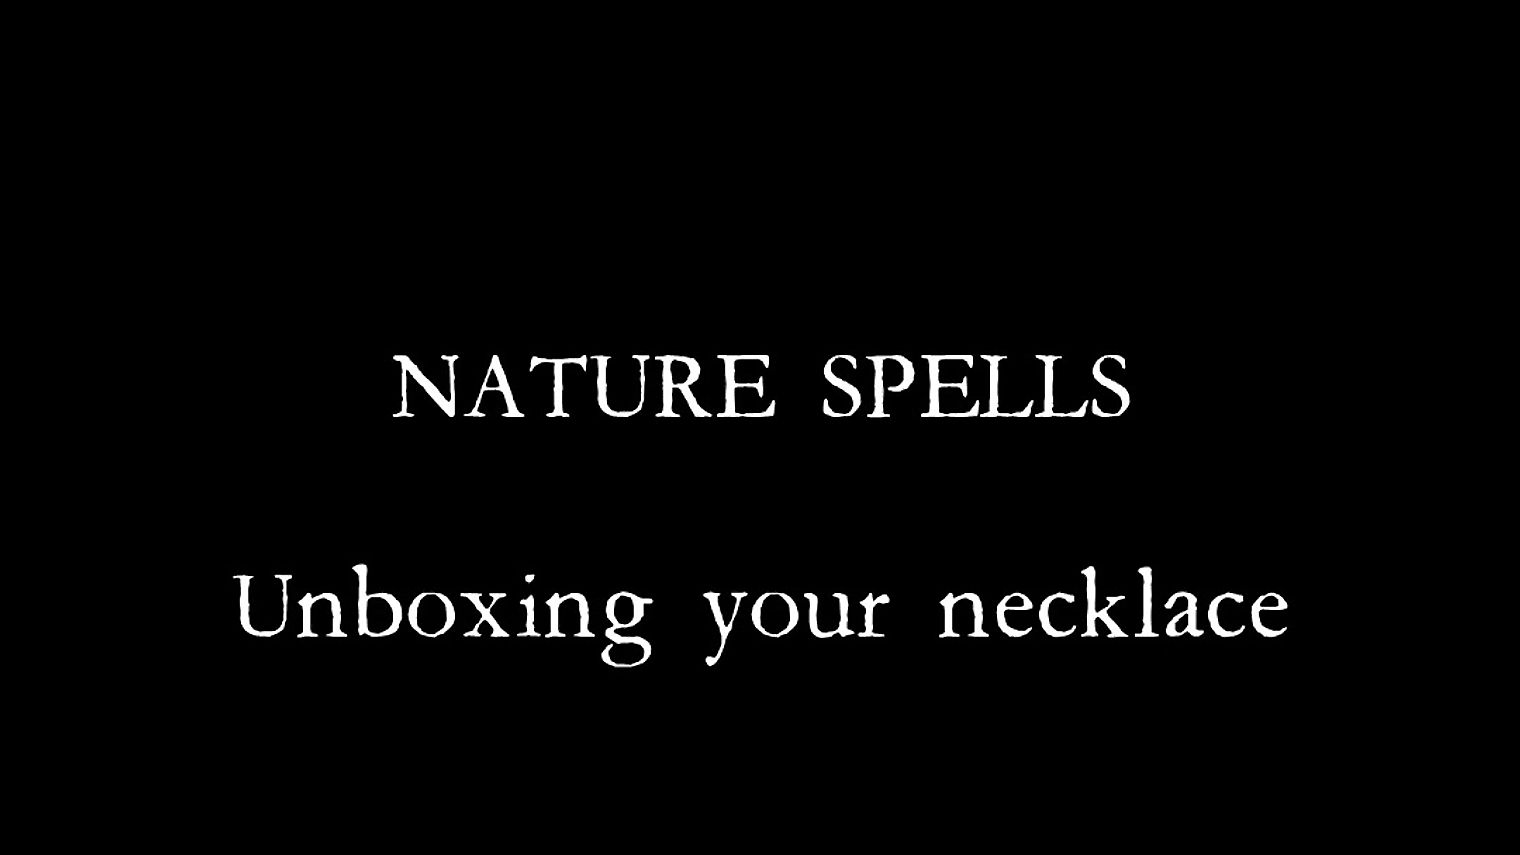 Unboxing your necklace